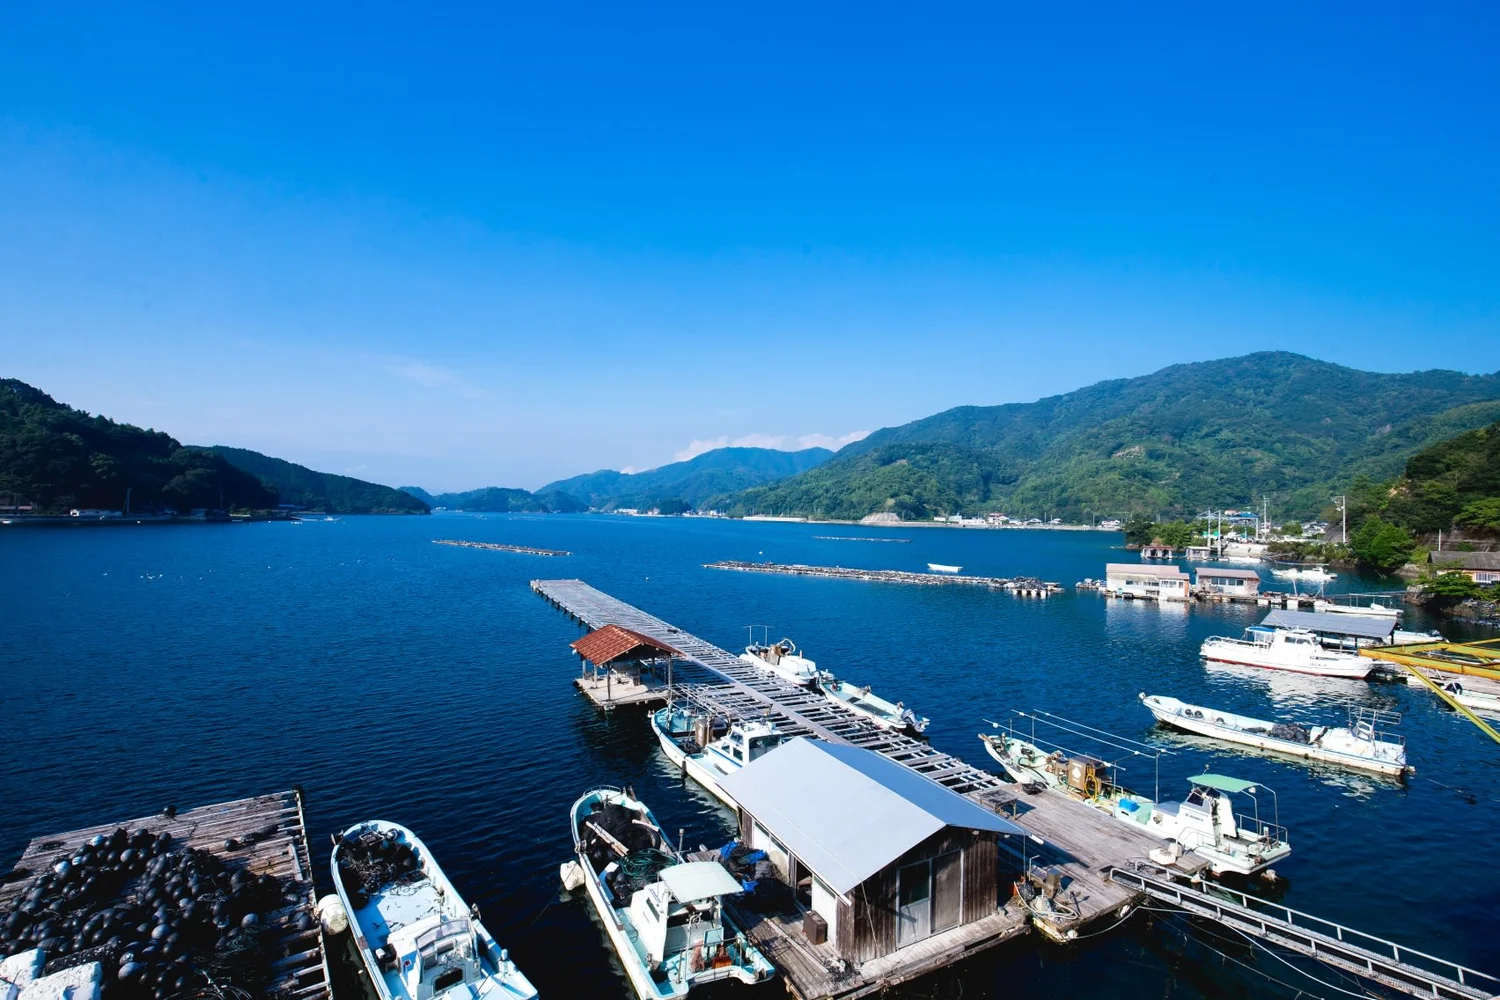 Book Oyster Pearl Farming Experience in Japan from Uwajima Oysters (Ehime, Shikoku)